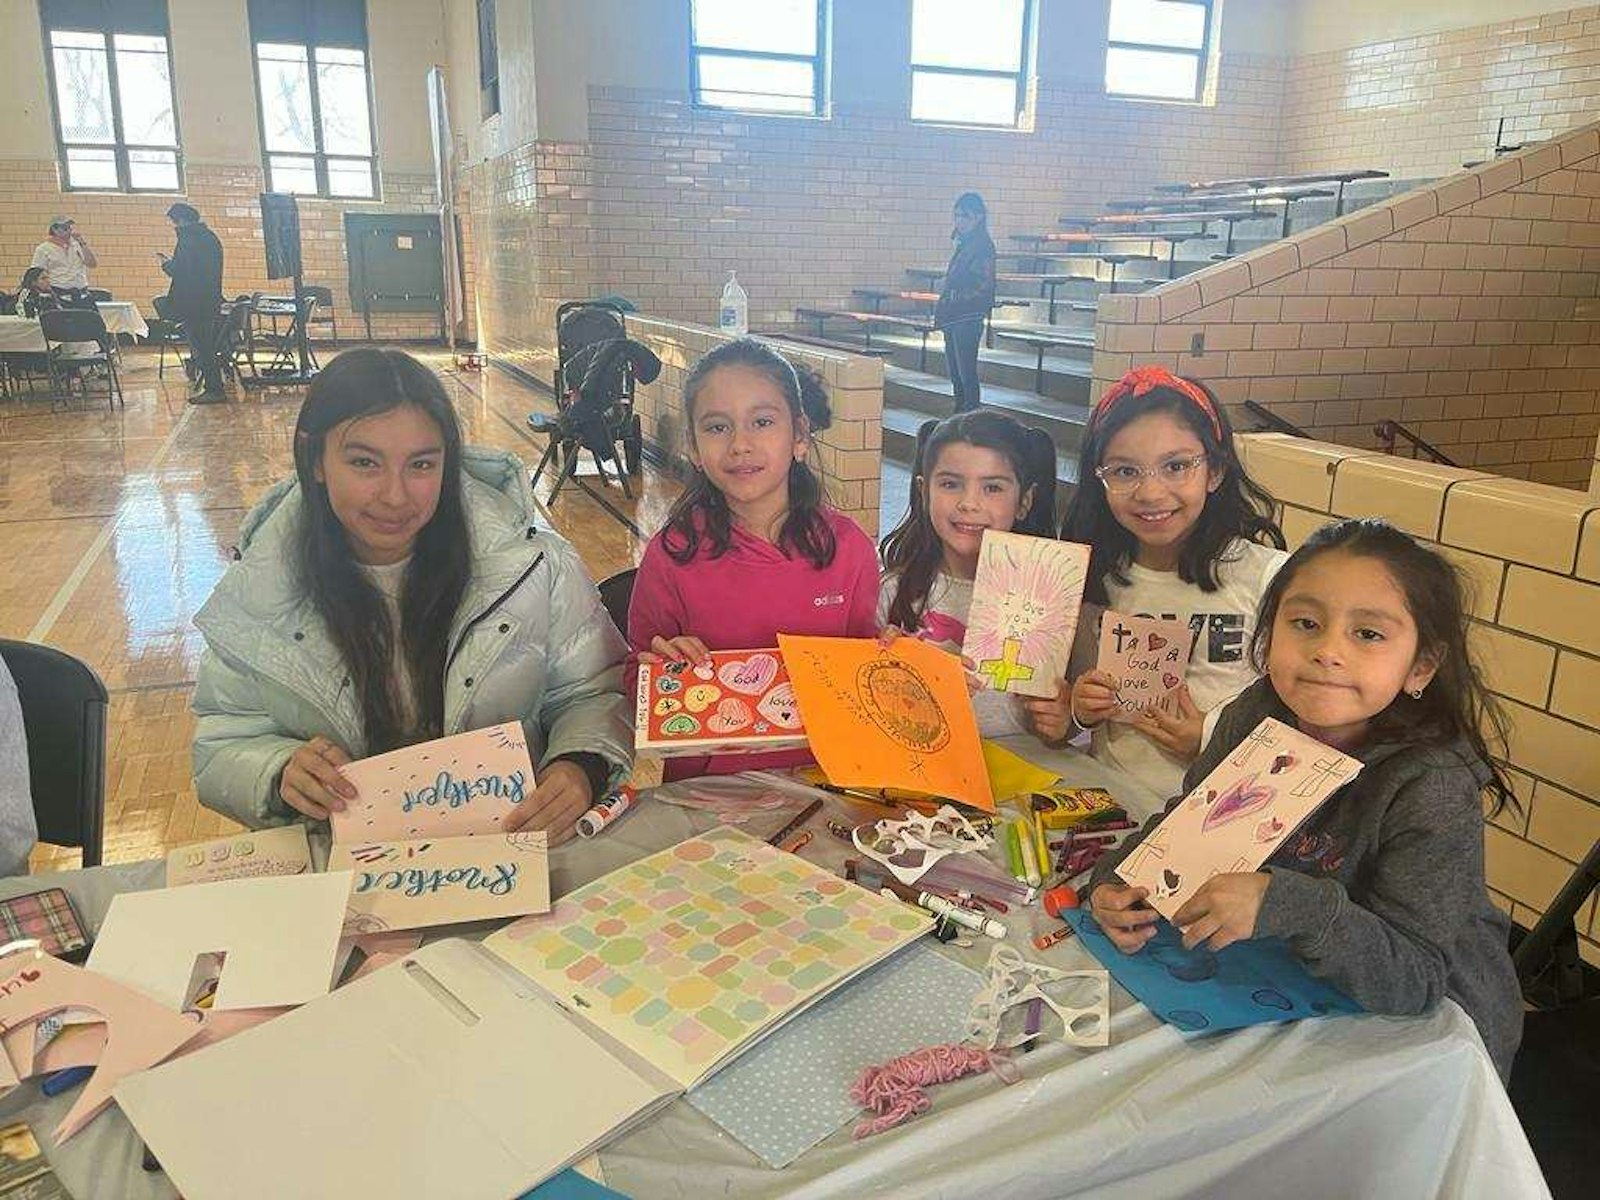 During last year's missions, children and teenagers made cards for mothers who are hesitant about having their babies, encouraging them to trust in God and choose life. (Photo courtesy of Carolina Aguilar-Garibay for Detroit Catholic en Español)